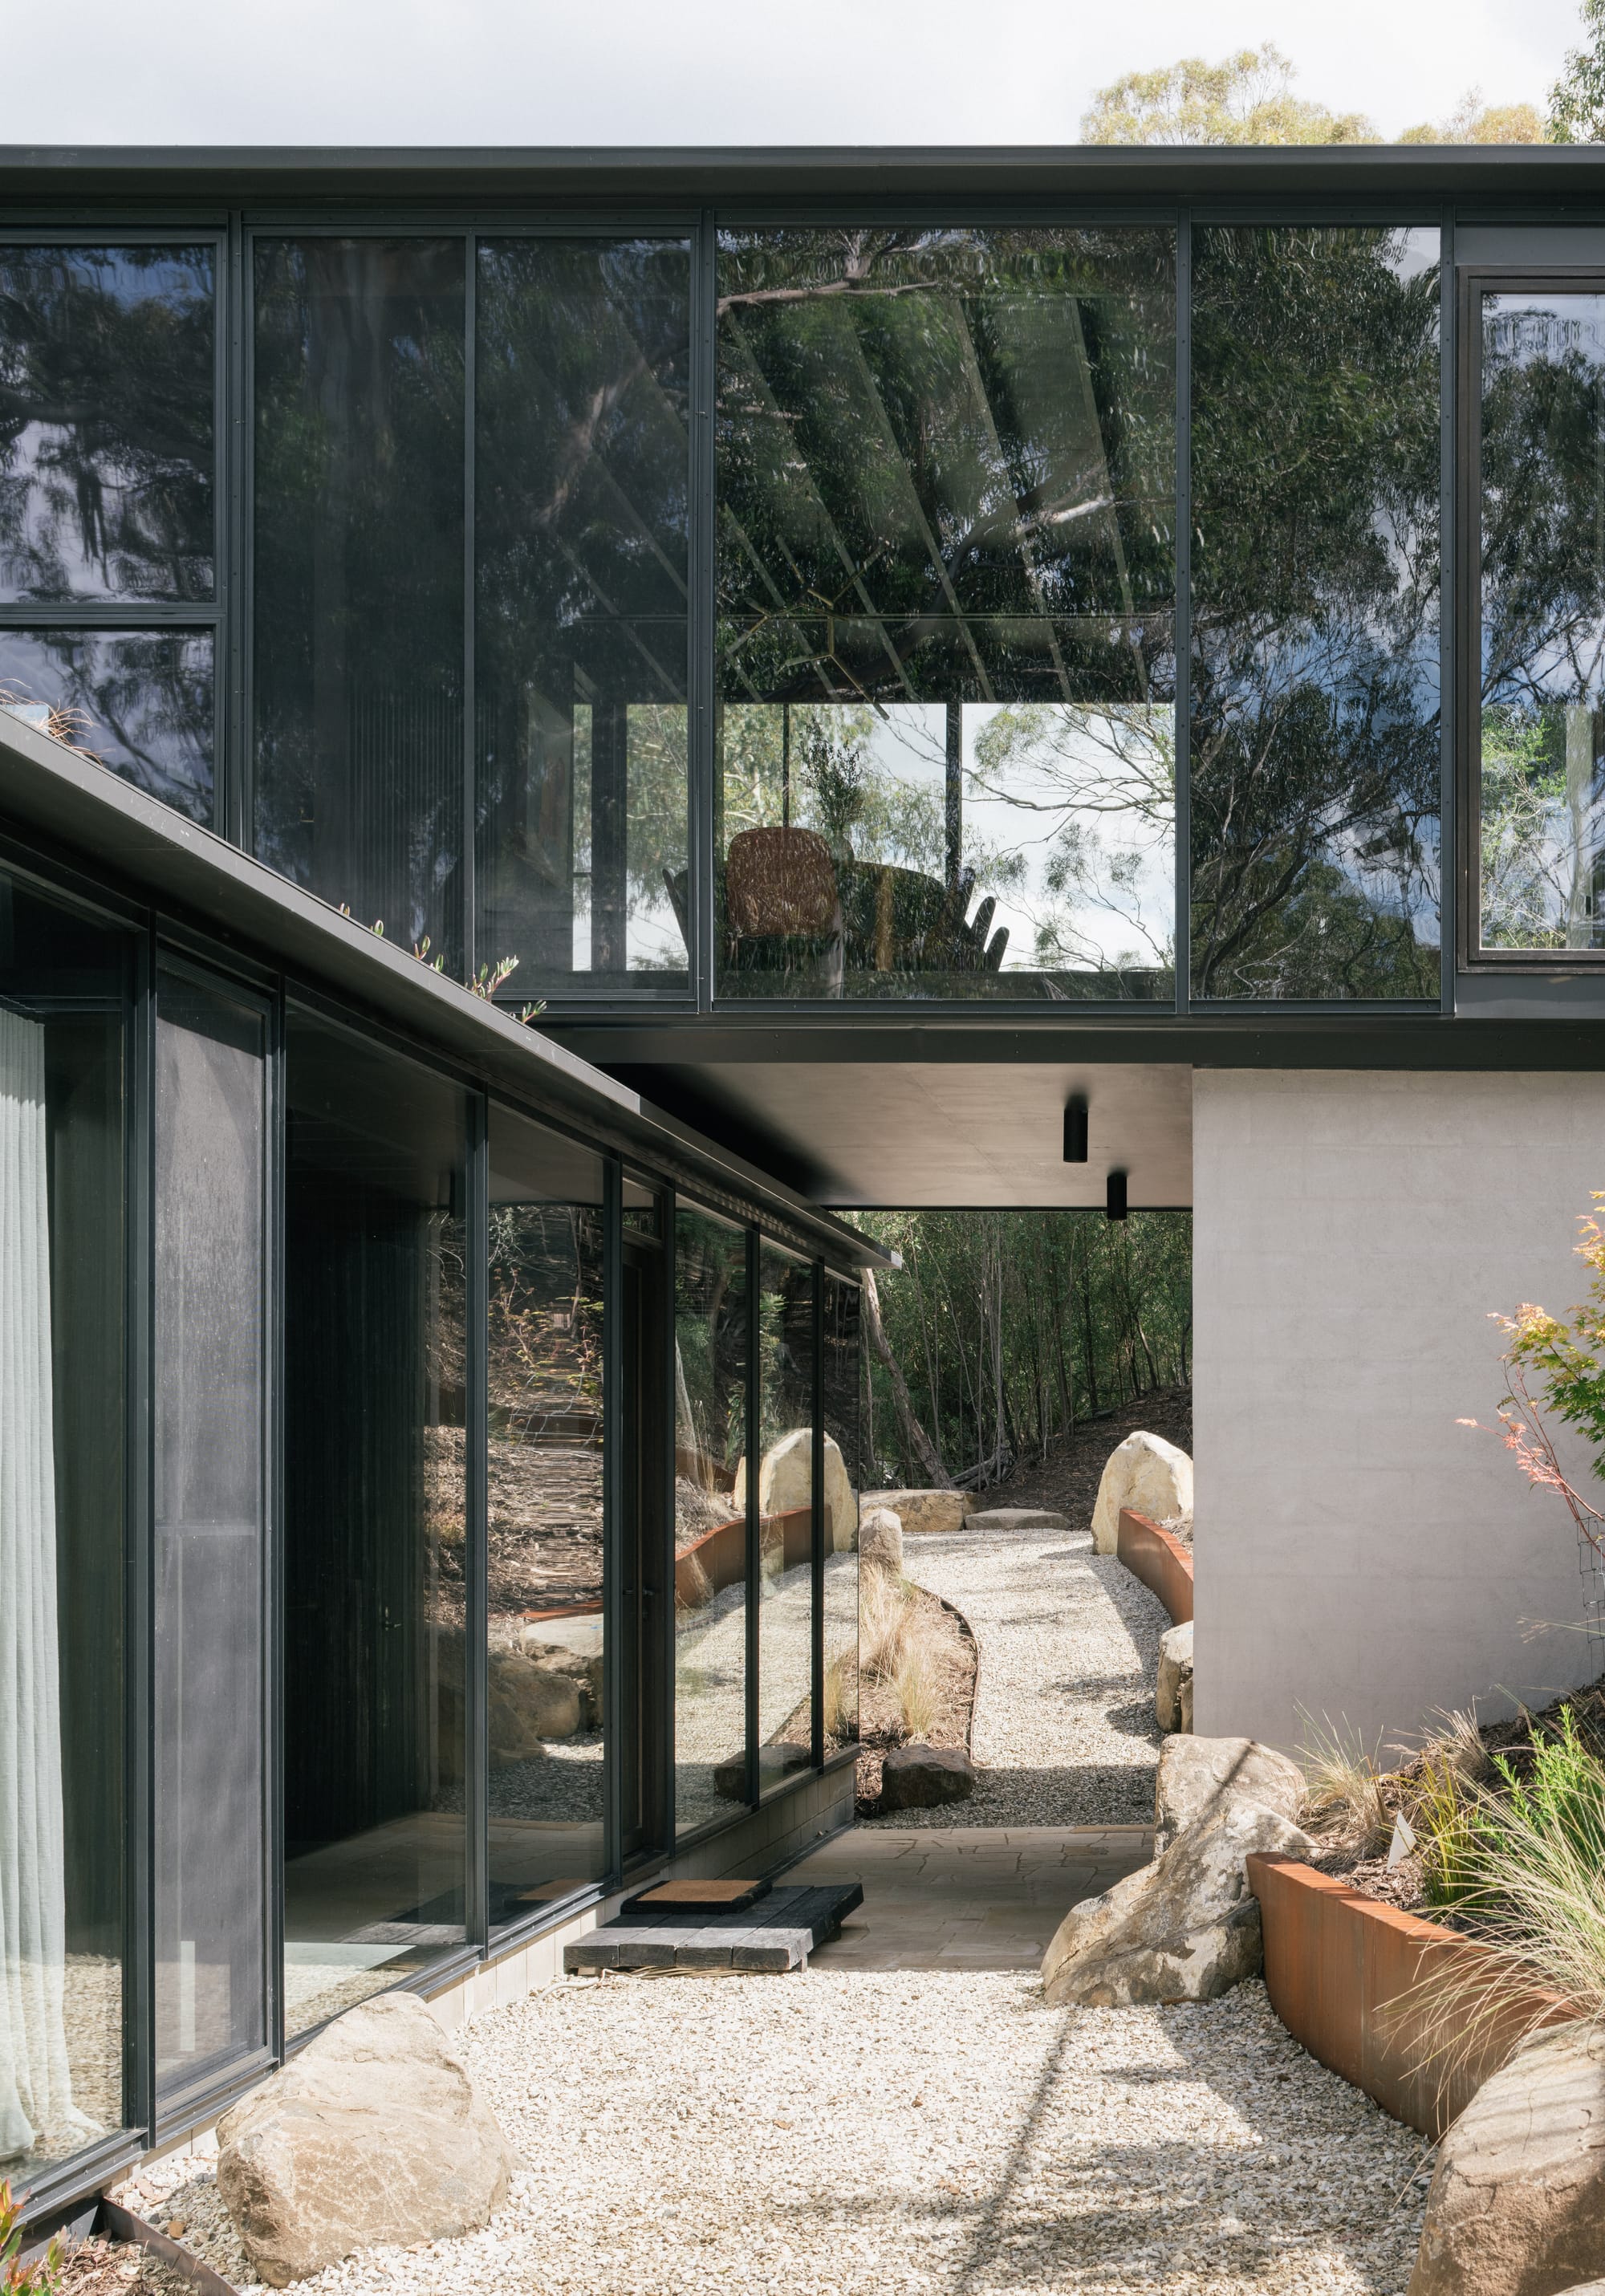 Taroona House by Archier. Photography by Thurston Empson. Two rectangular structures stacked on top of one another. Rendered brick, glass and black. Stone pathway through buildings. 